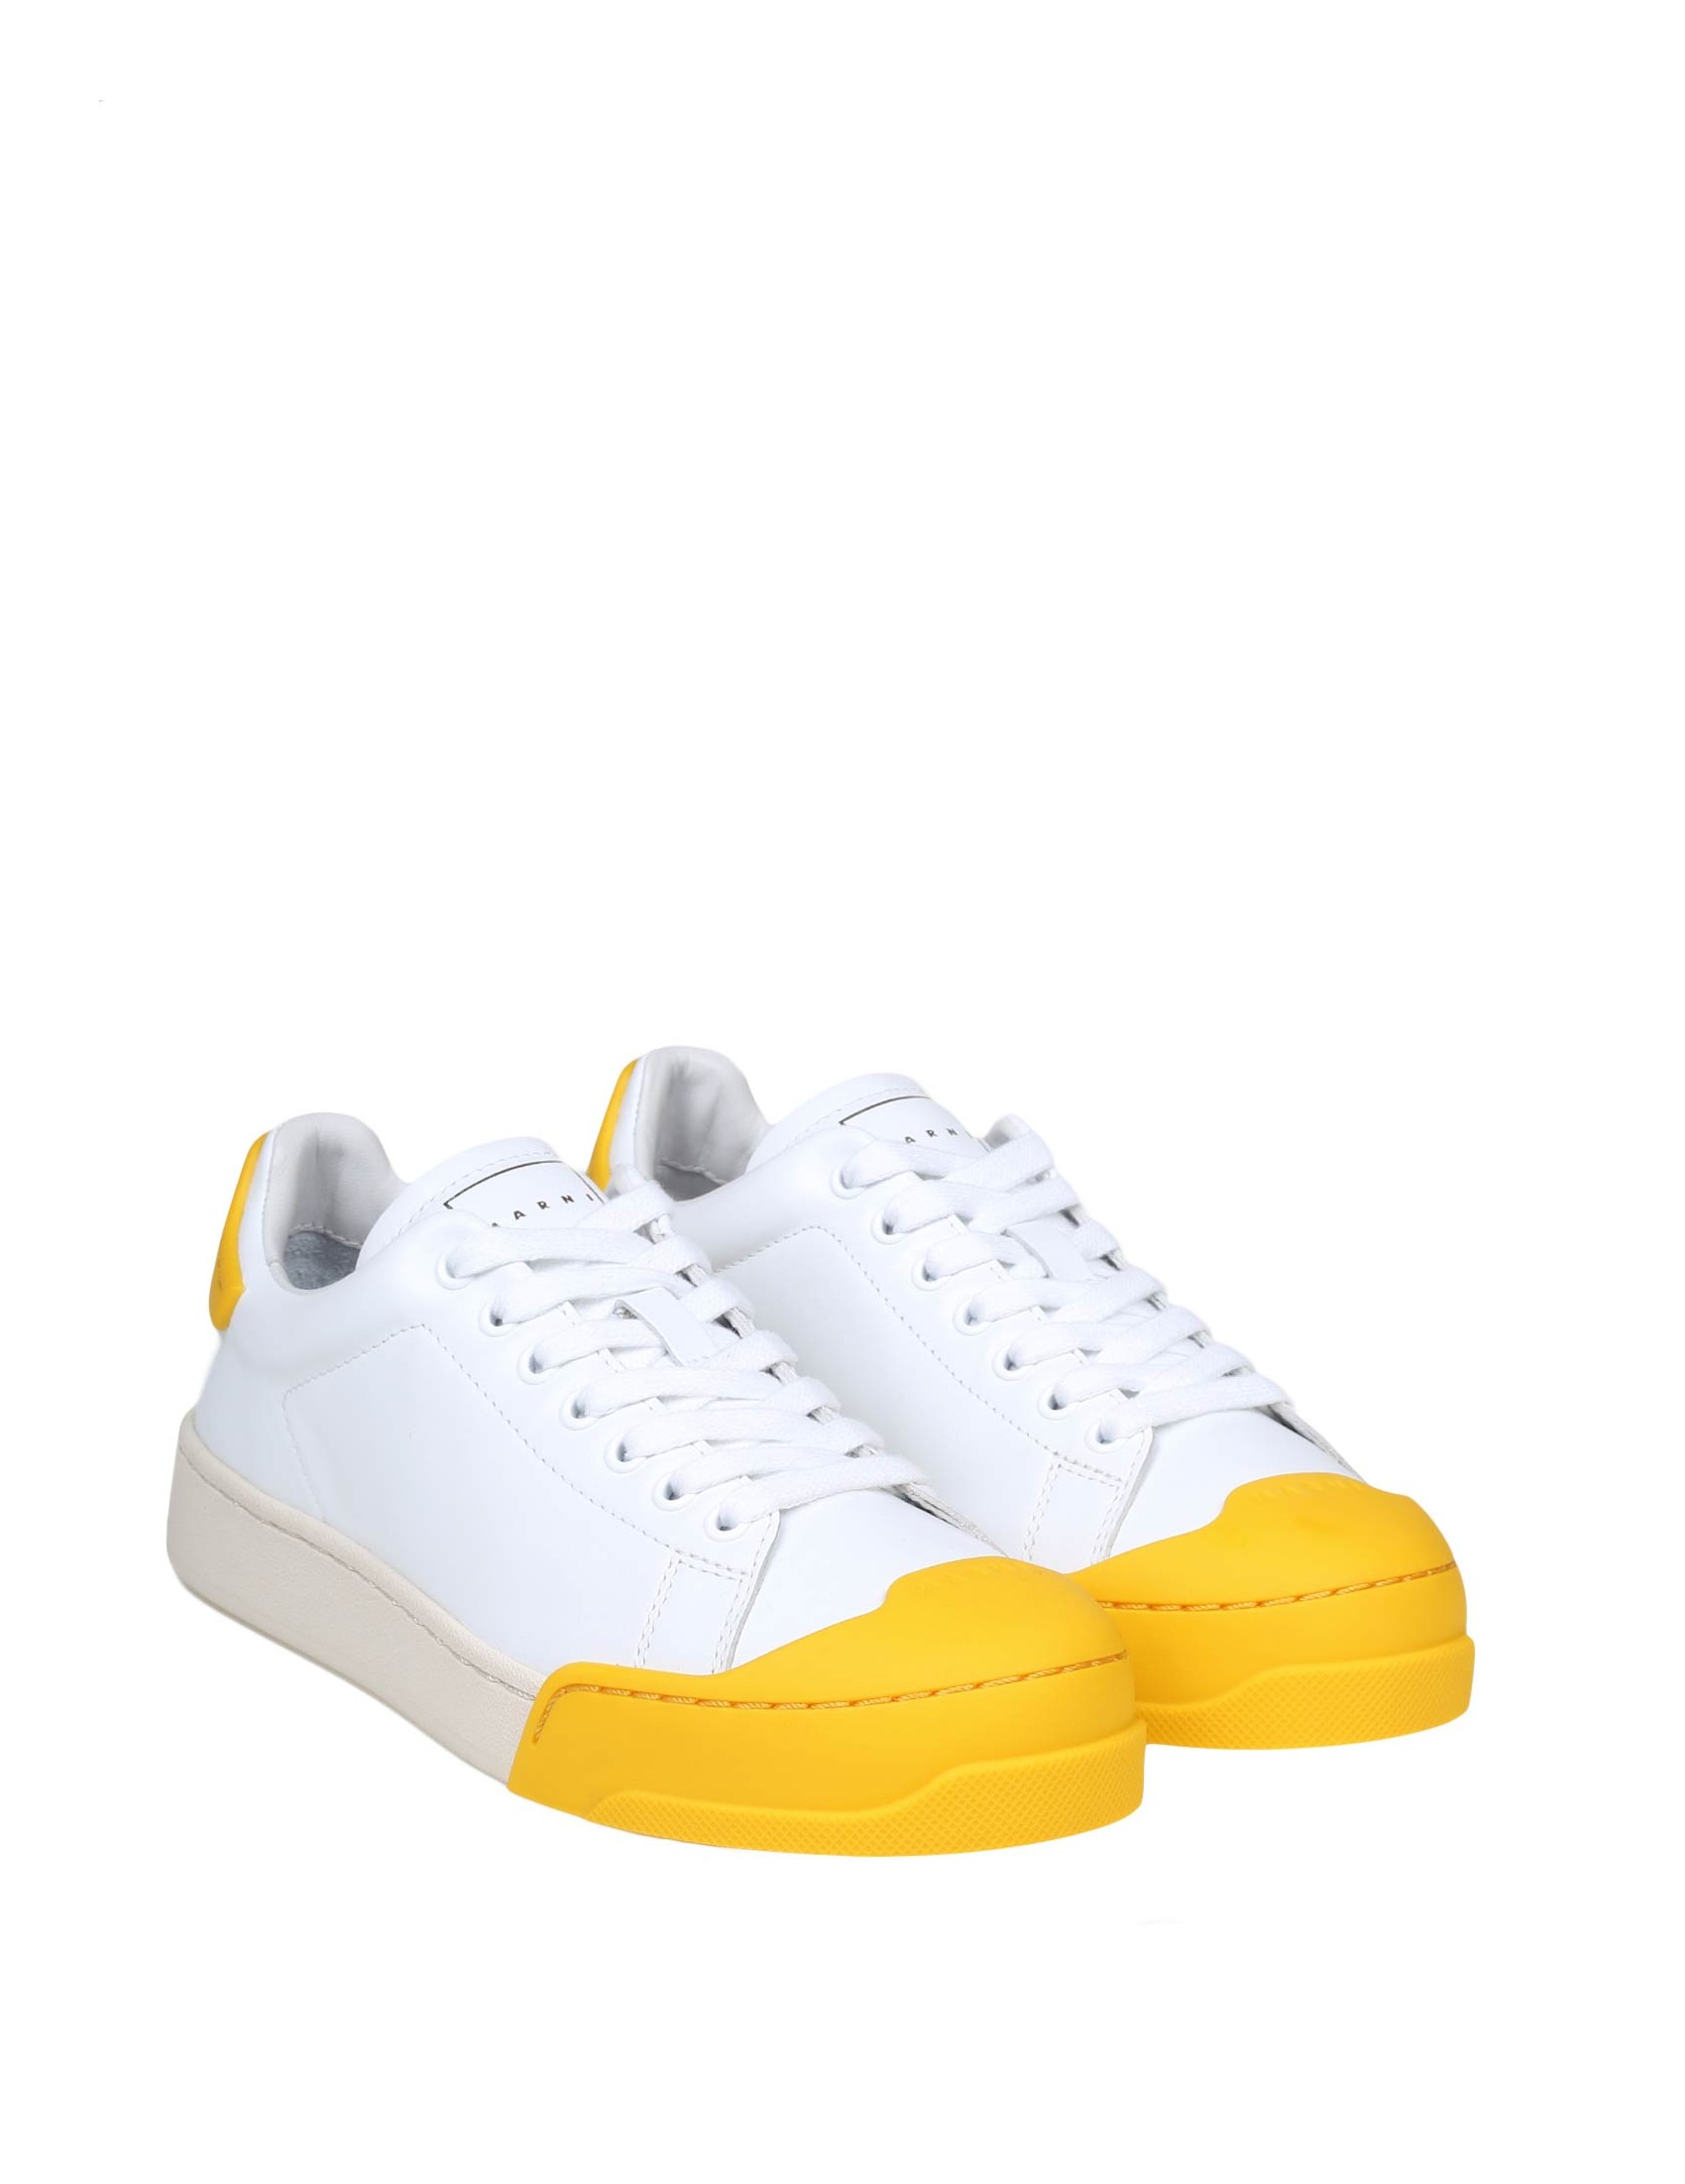 MARNI SNEAKERS IN LEATHER COLOR WHITE AND YELLOW